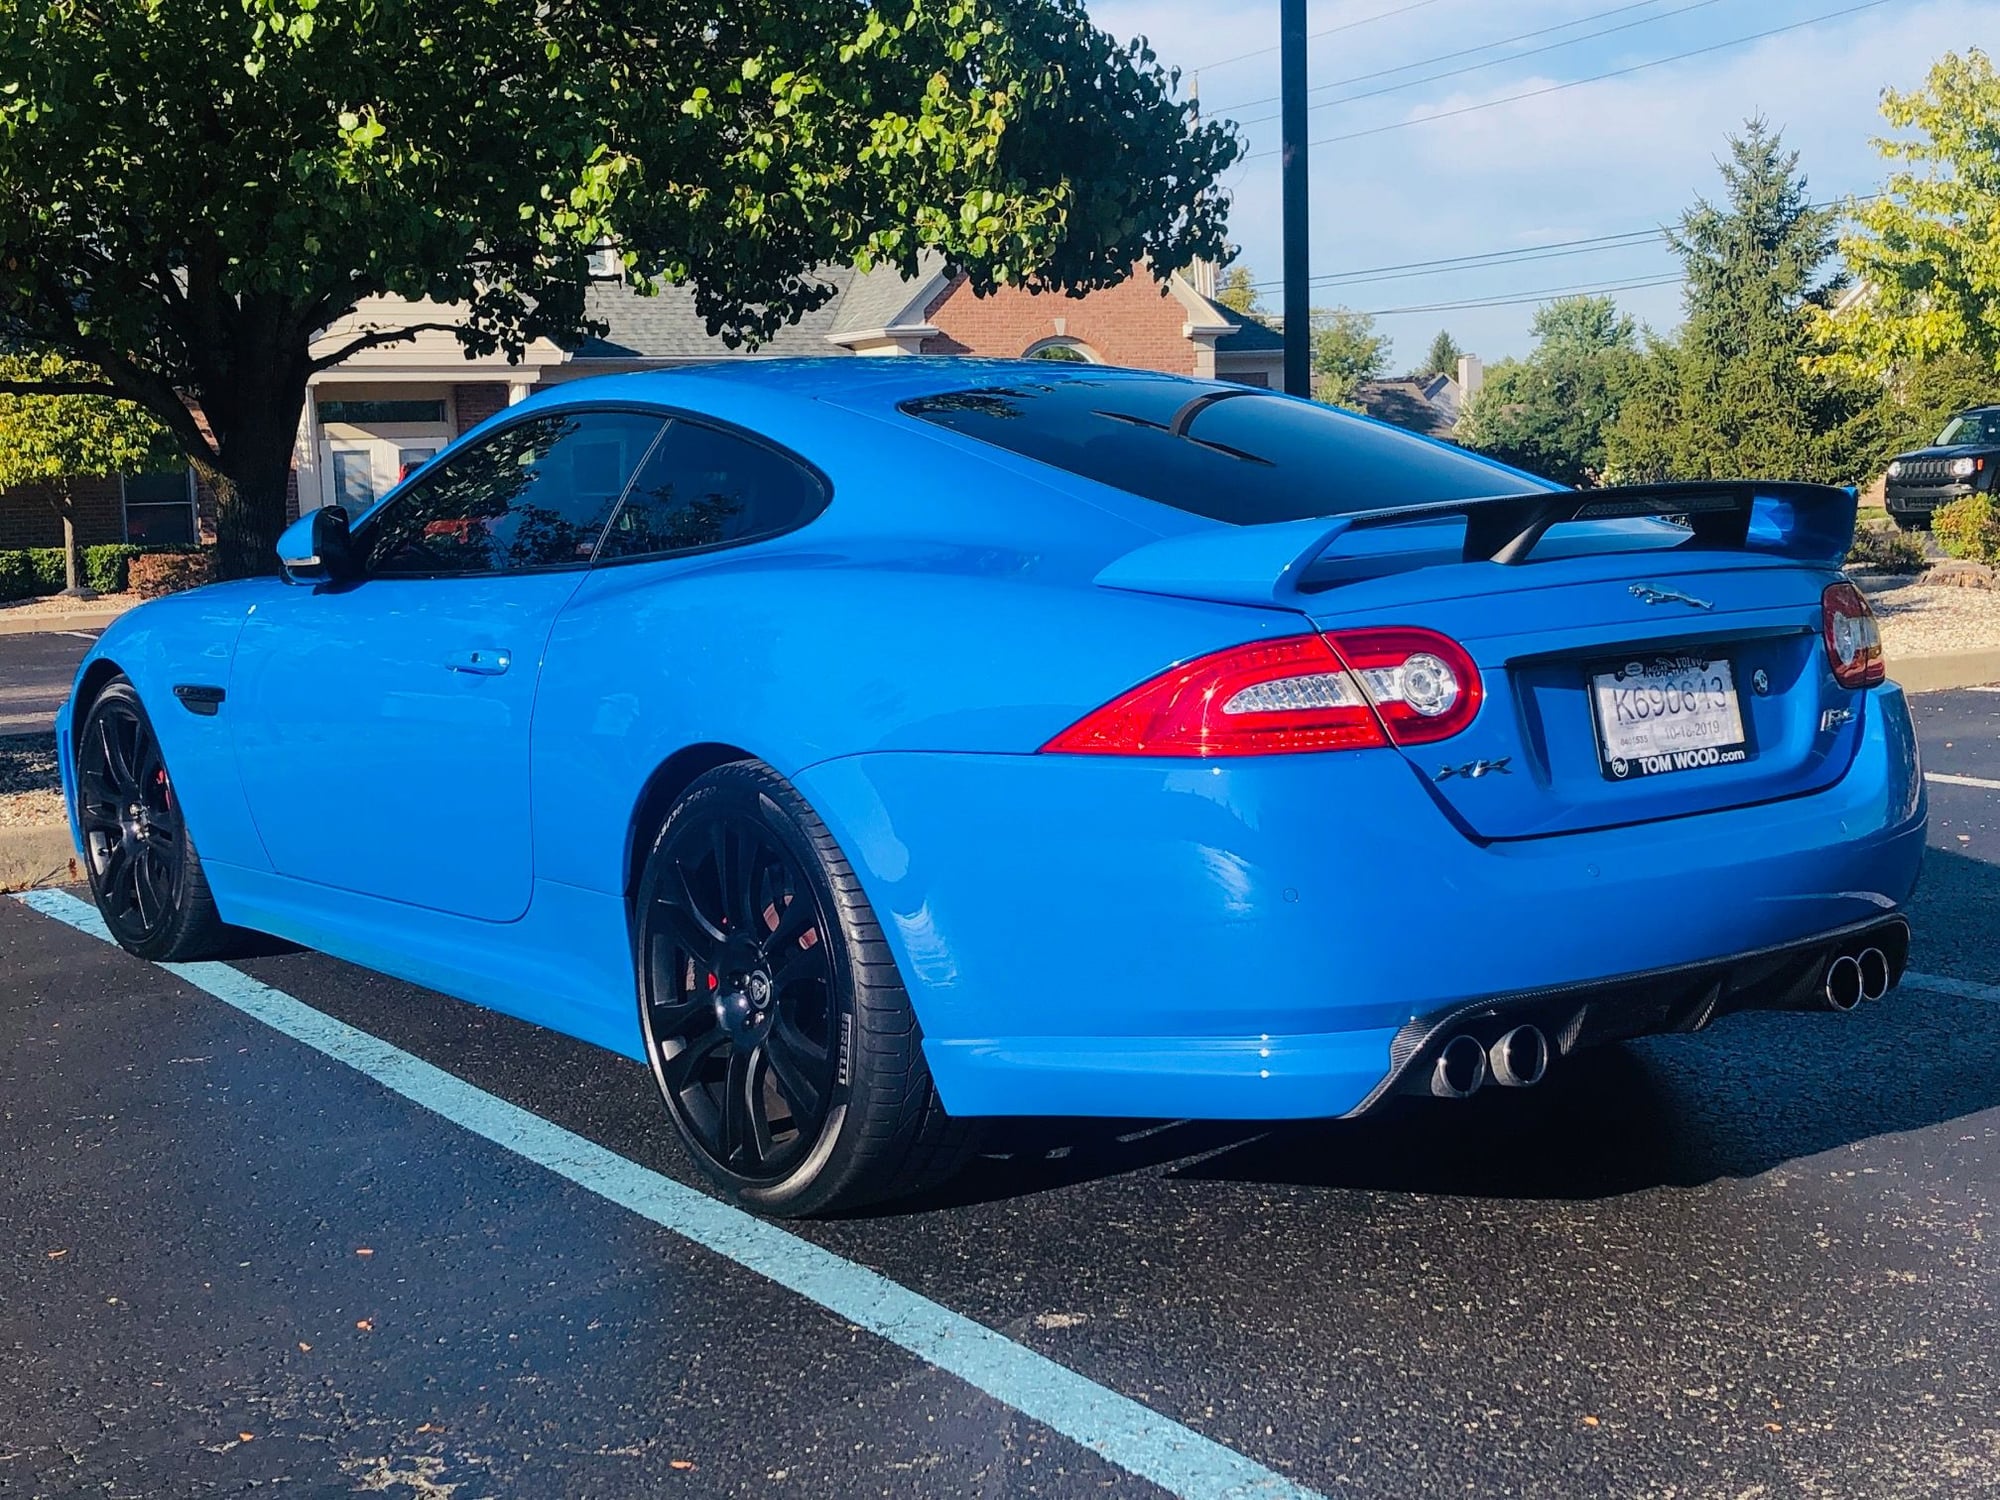 2013 Jaguar XKR-S - 2013 XKR-S parts. Rear CF wing, wheels/tires (3) side view mirrors, maybe more. FRB - Fishers, IN 46037, United States